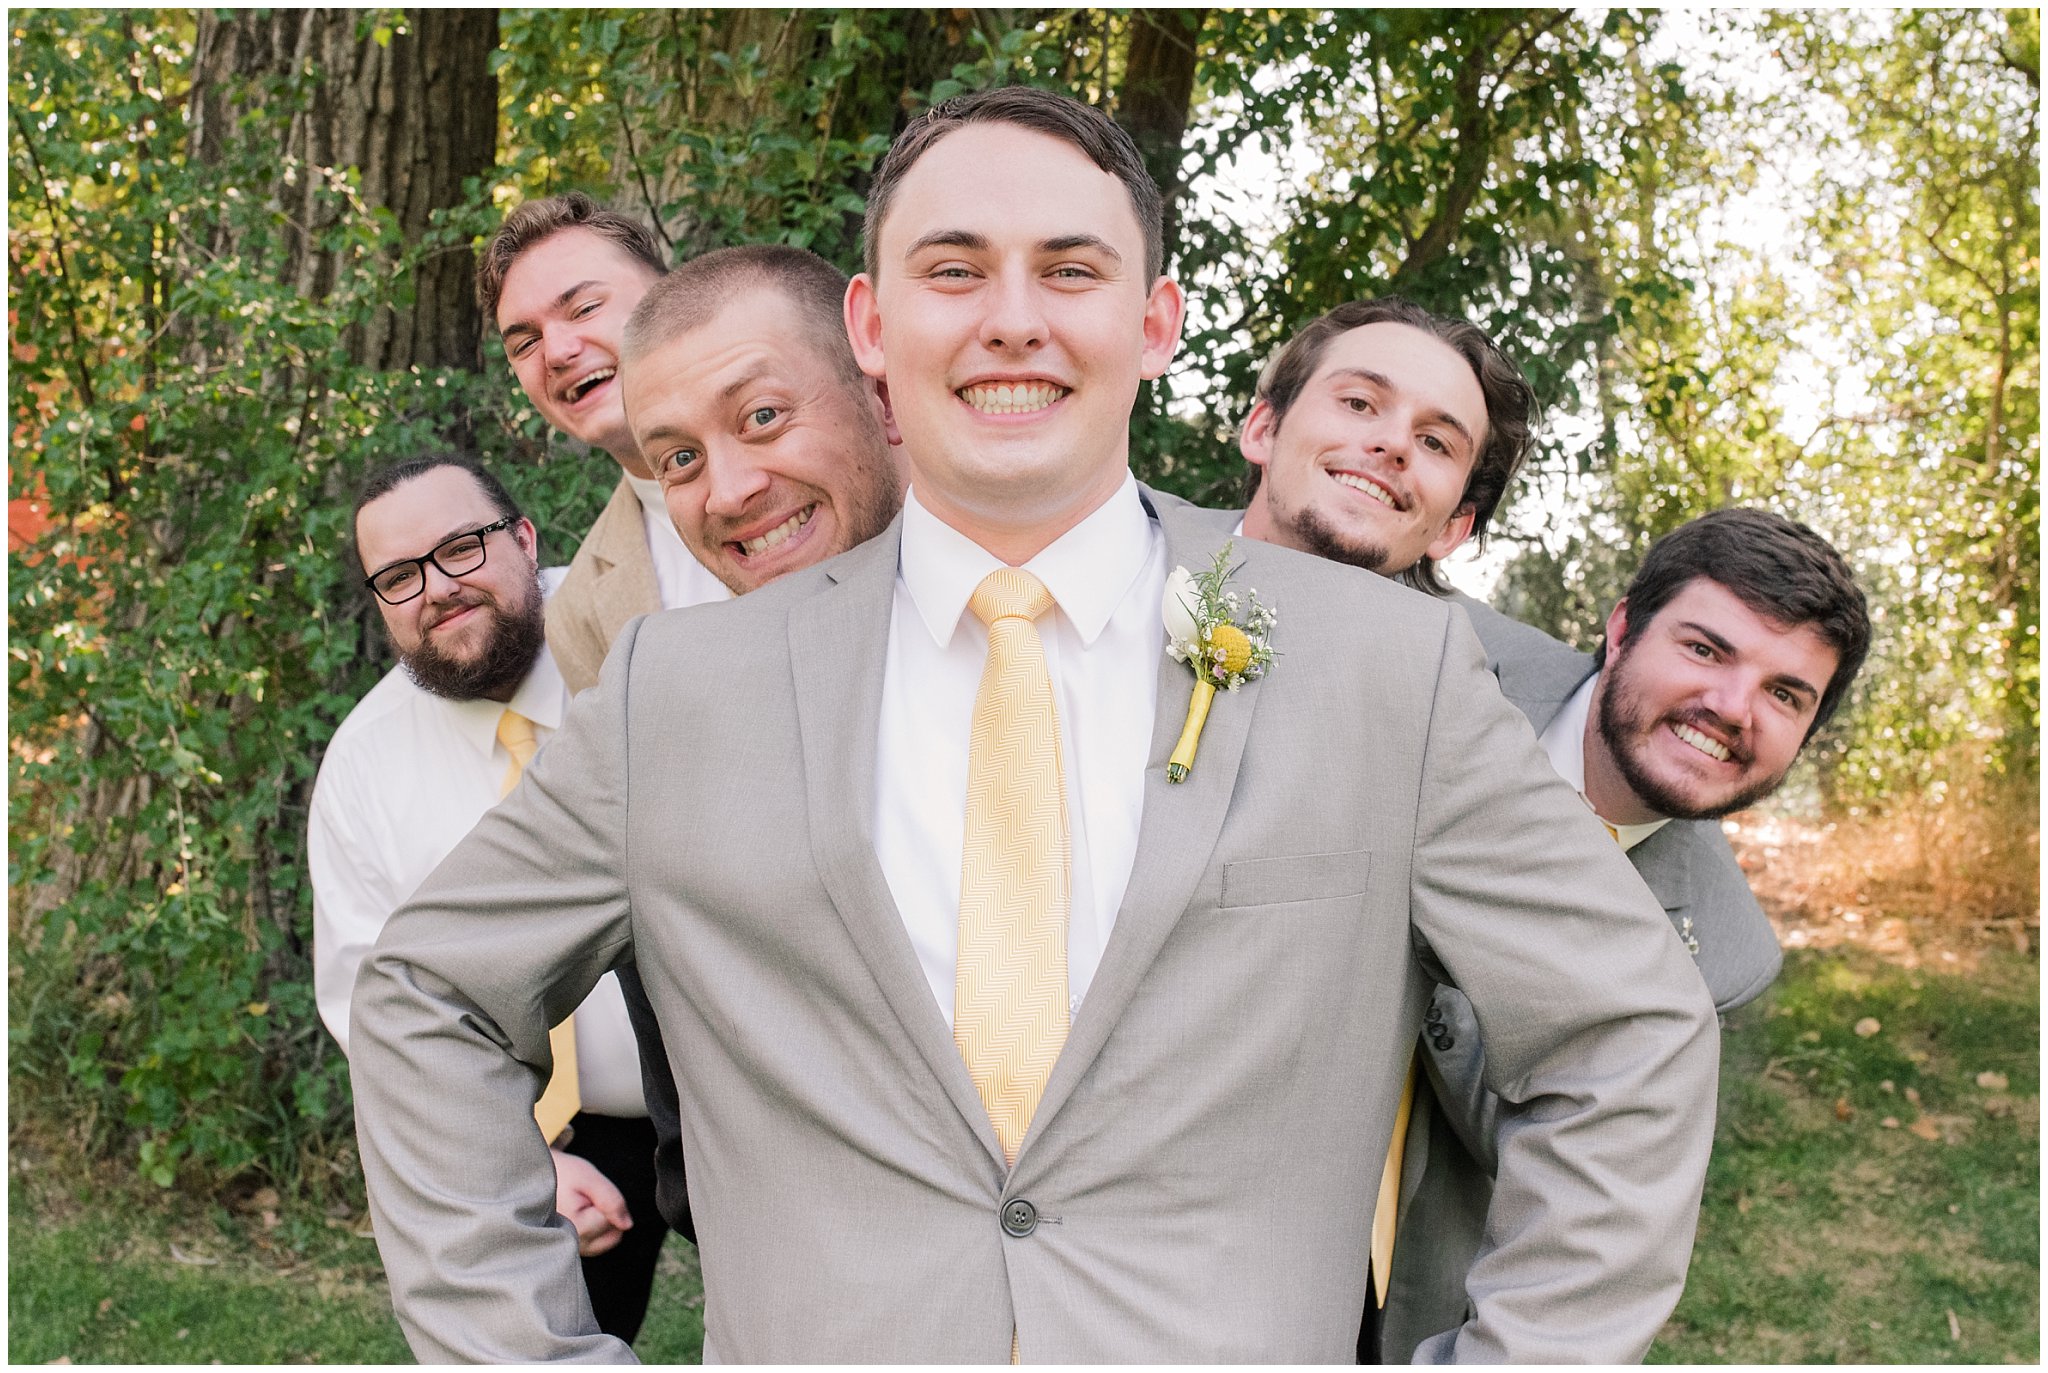 Goofy groomsmen in yellow ties | Fountain View Event Venue and Bountiful Temple Wedding | Jessie and Dallin Photography